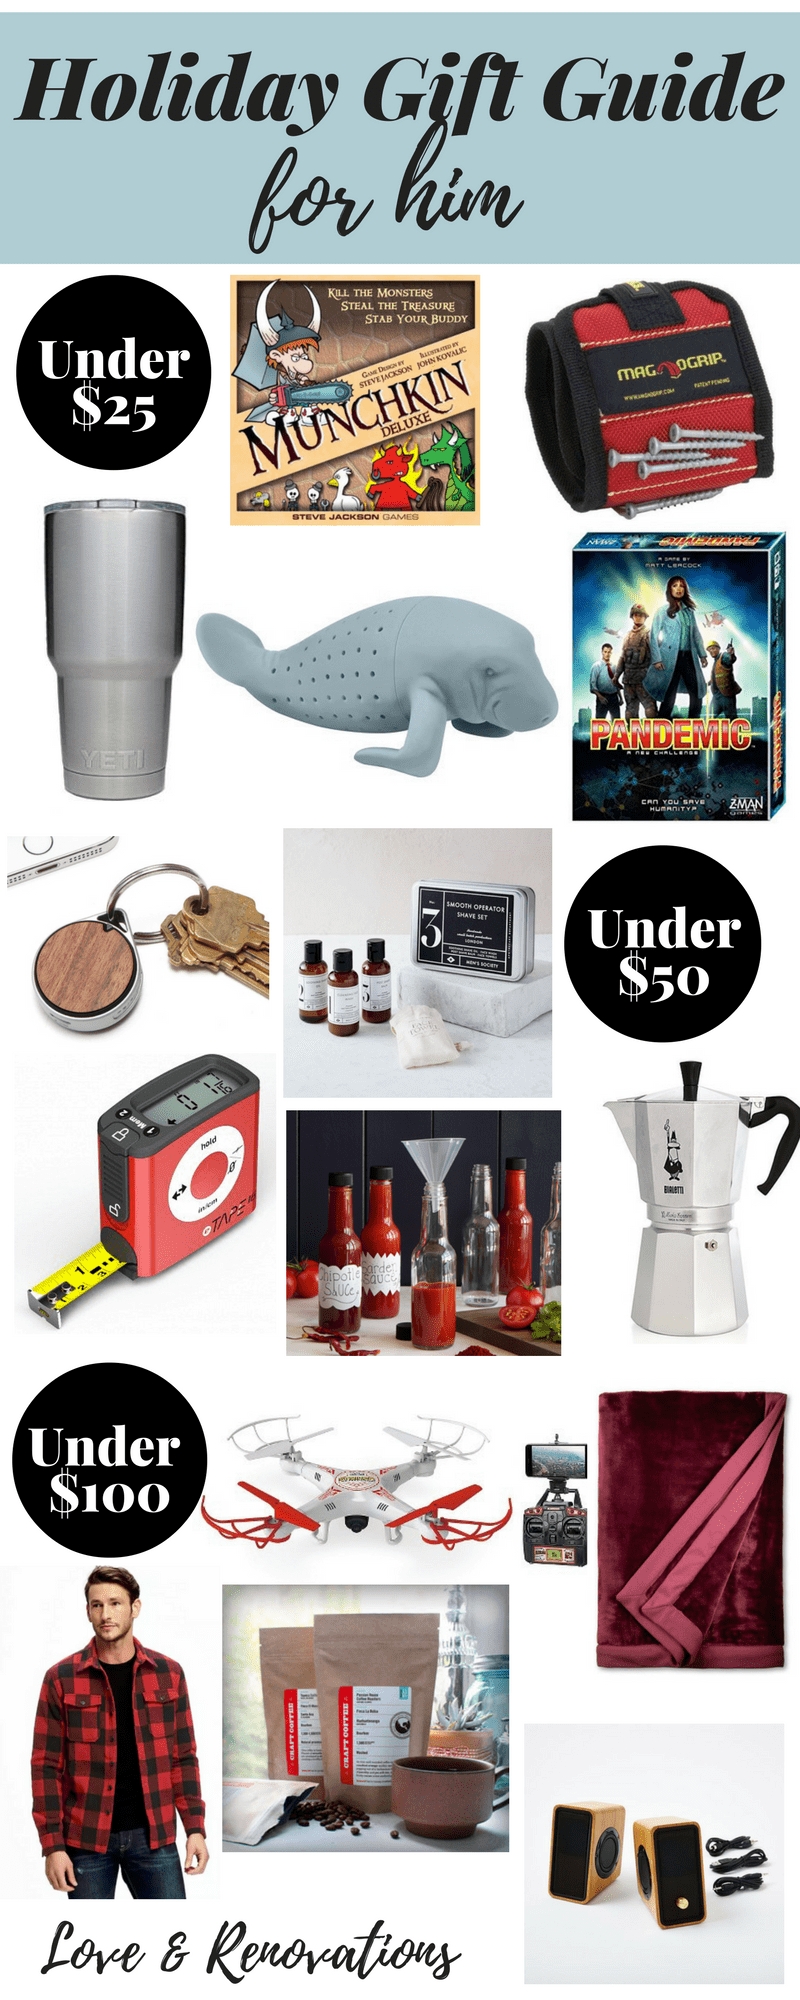 10 Trendy Gift Ideas For People Who Have Everything 2016 holiday gift guide for him love renovations 6 2022